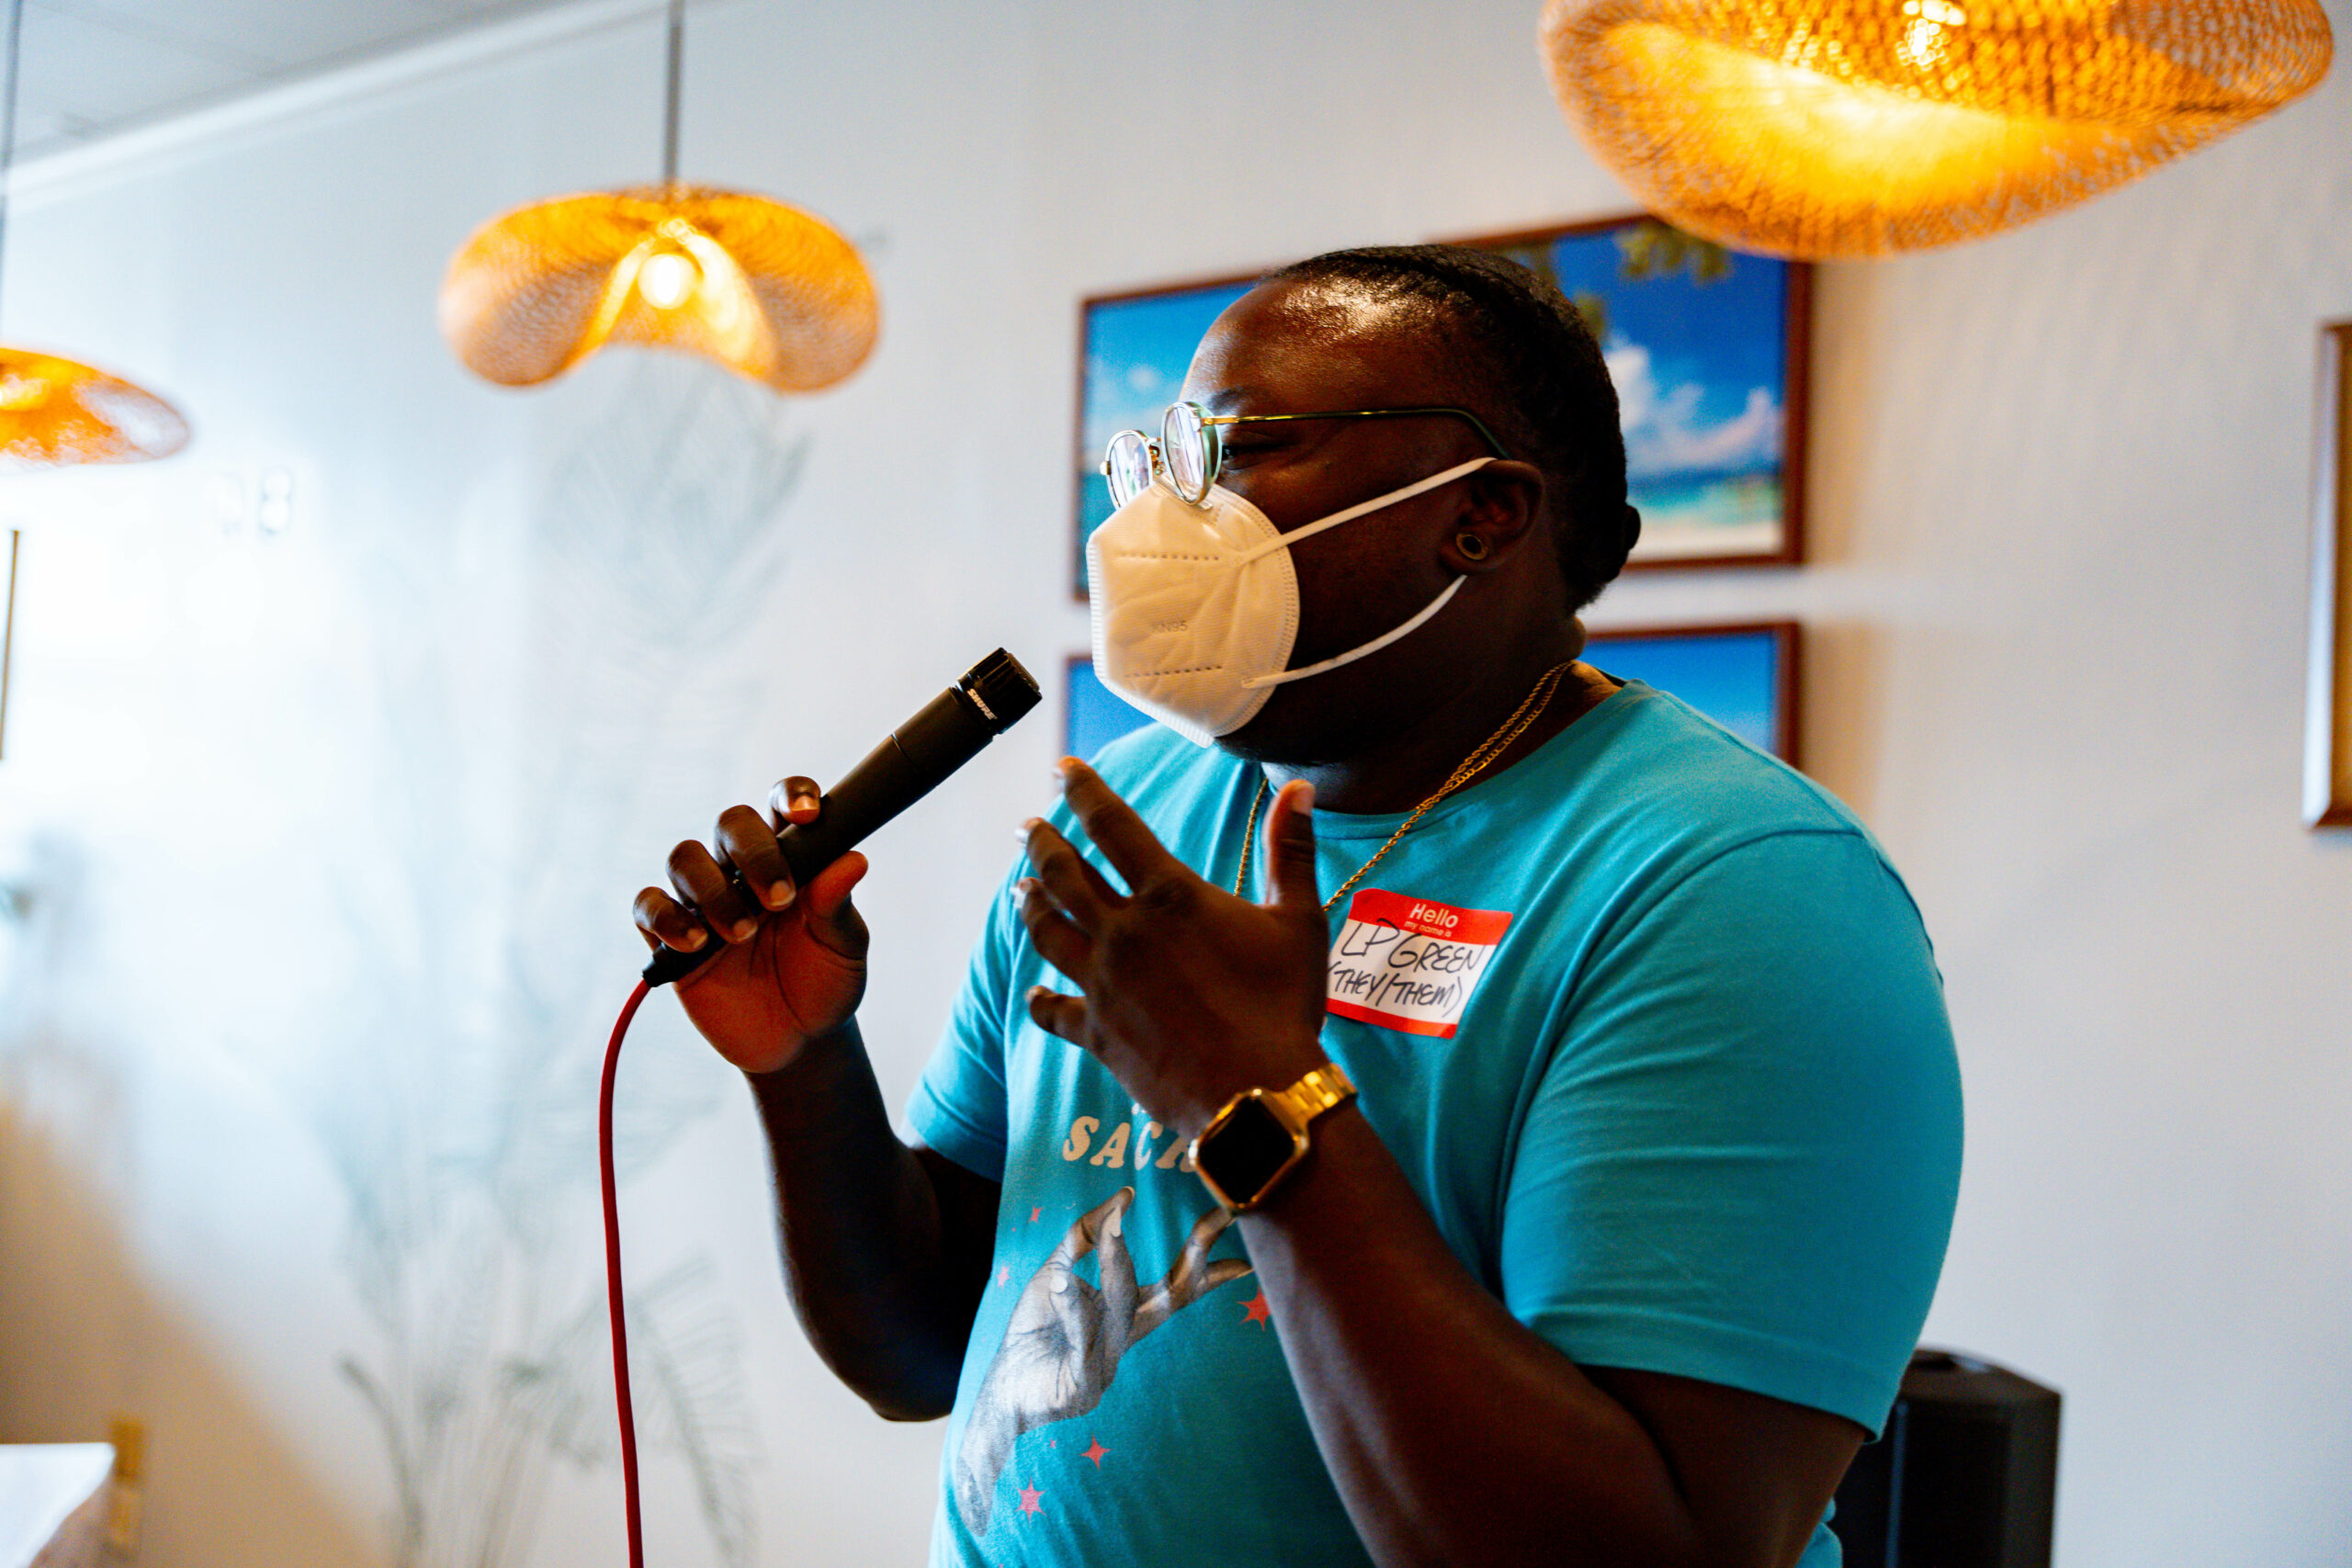 A person wearing a blue shirt and Covid-19 mask speaks into a microphone